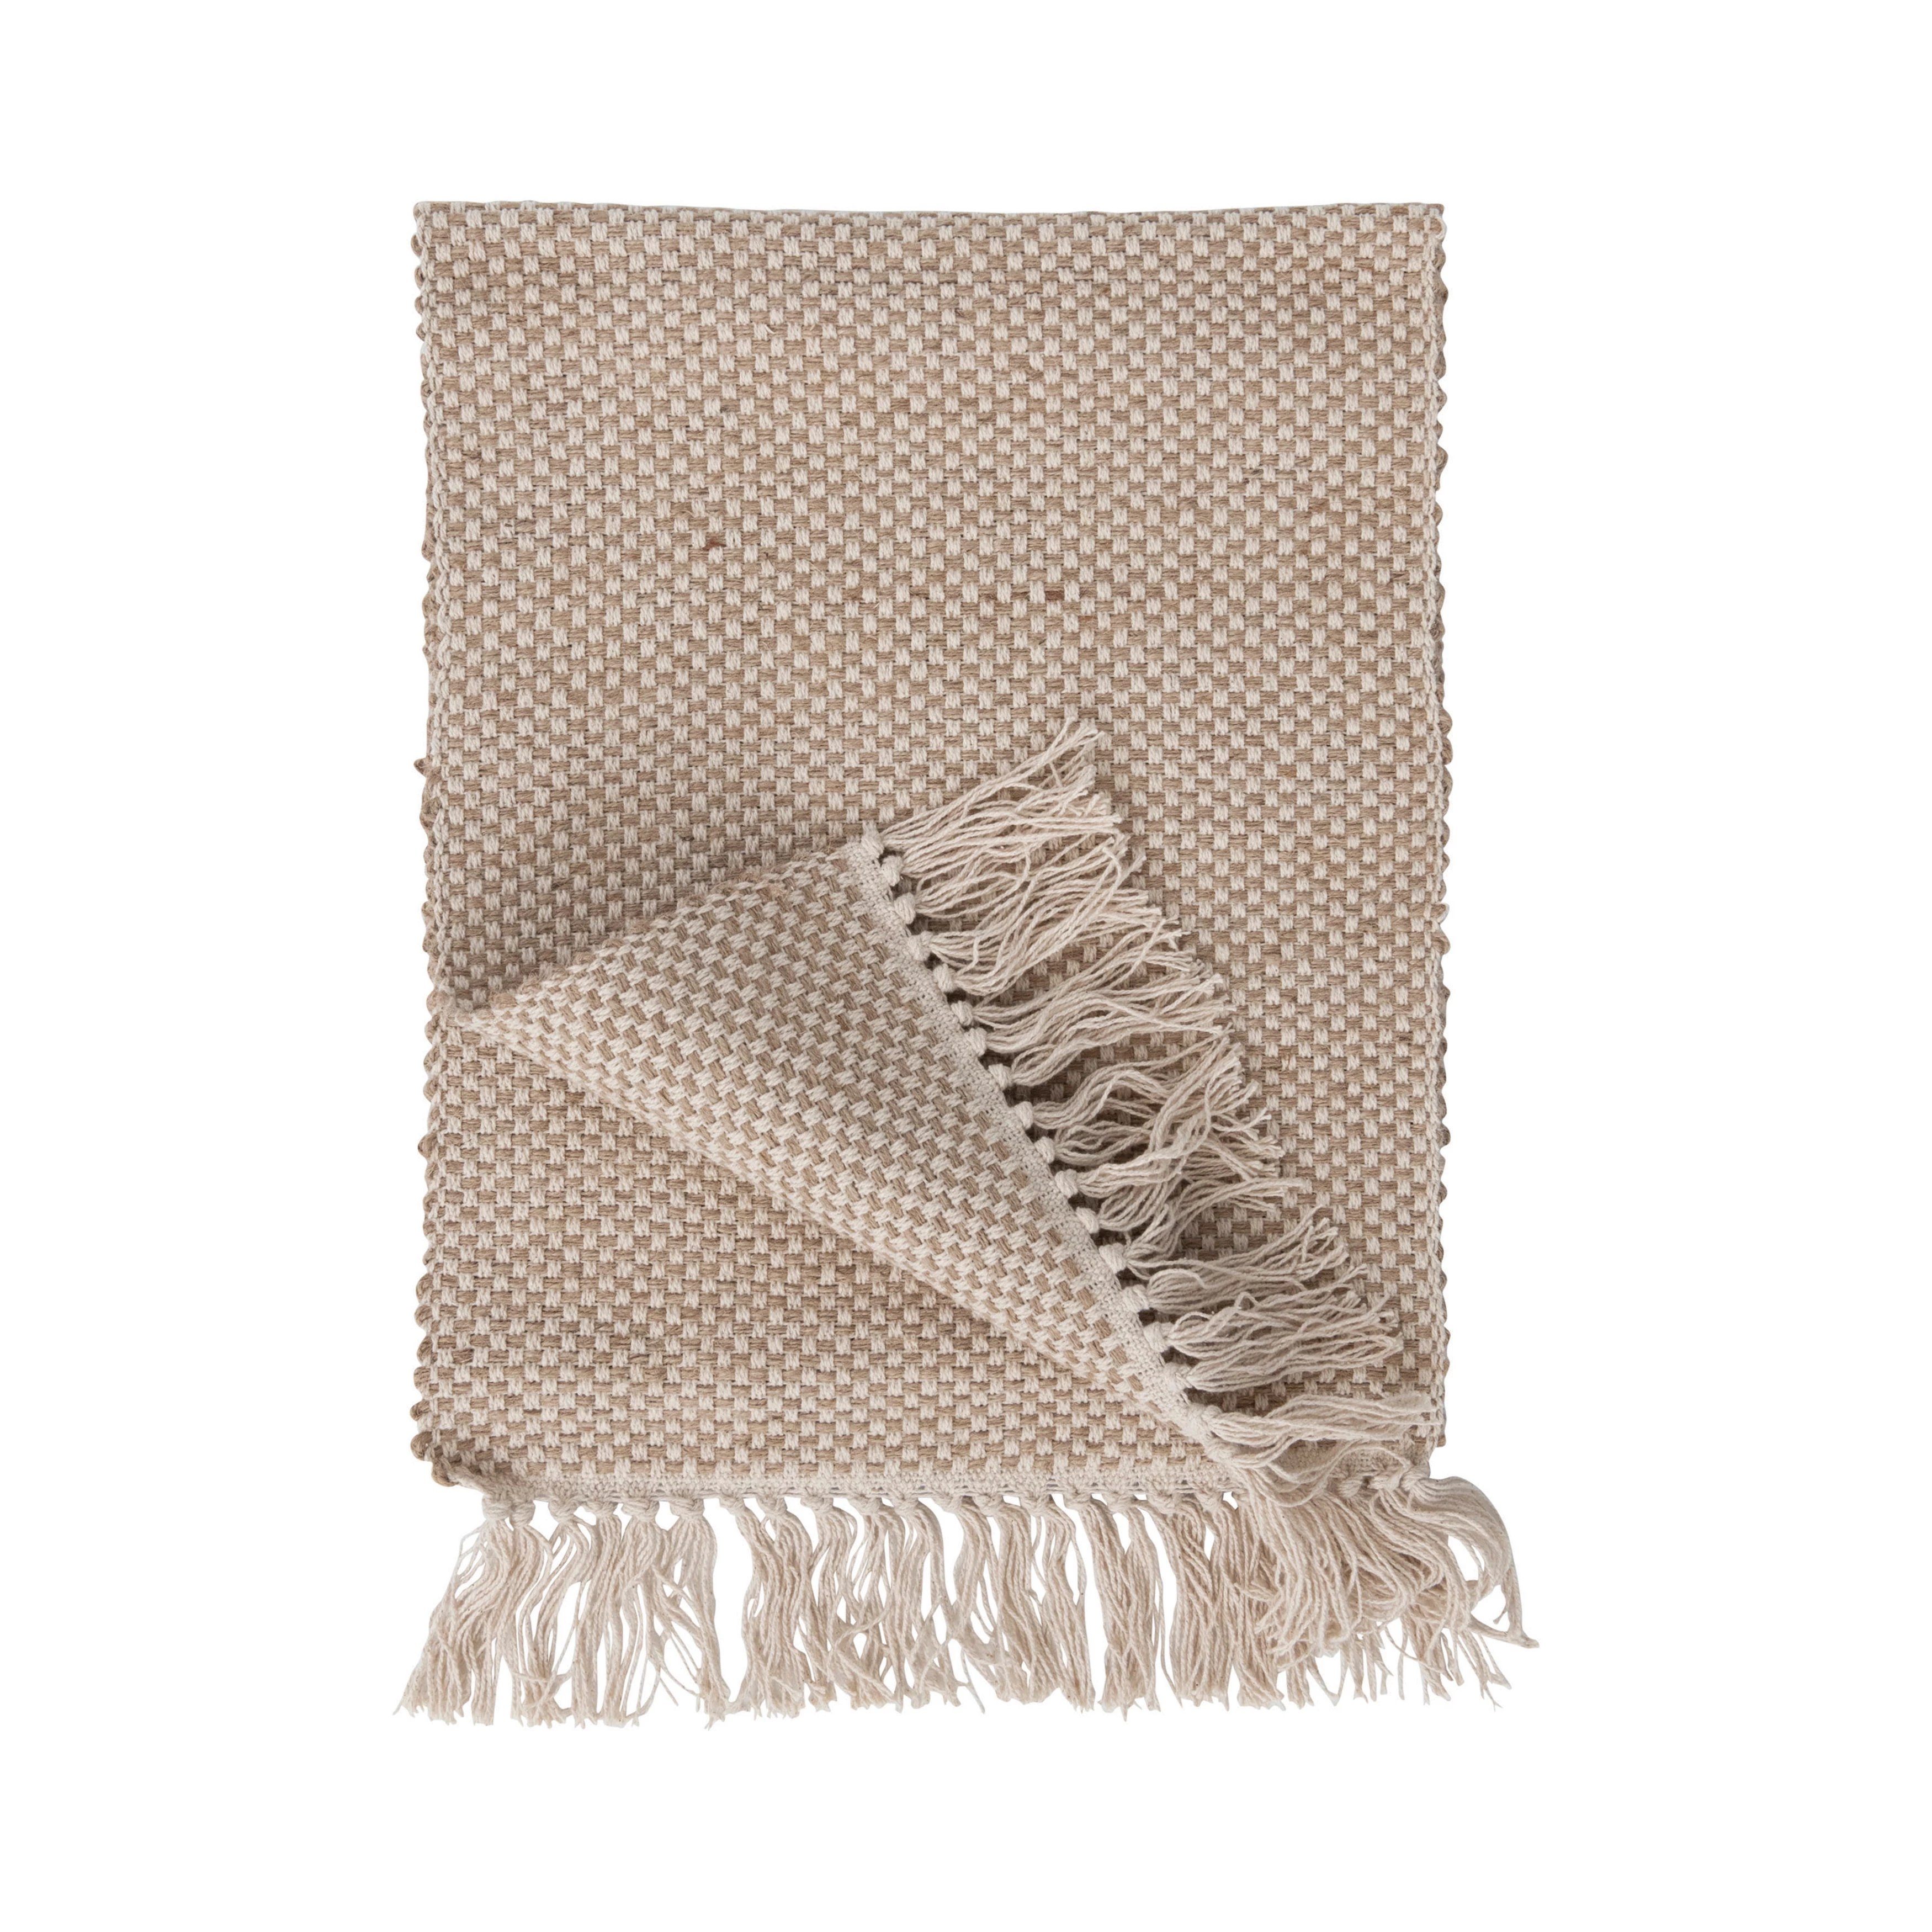 Woven Jute and Cotton Table Runner with Fringe - Image 2